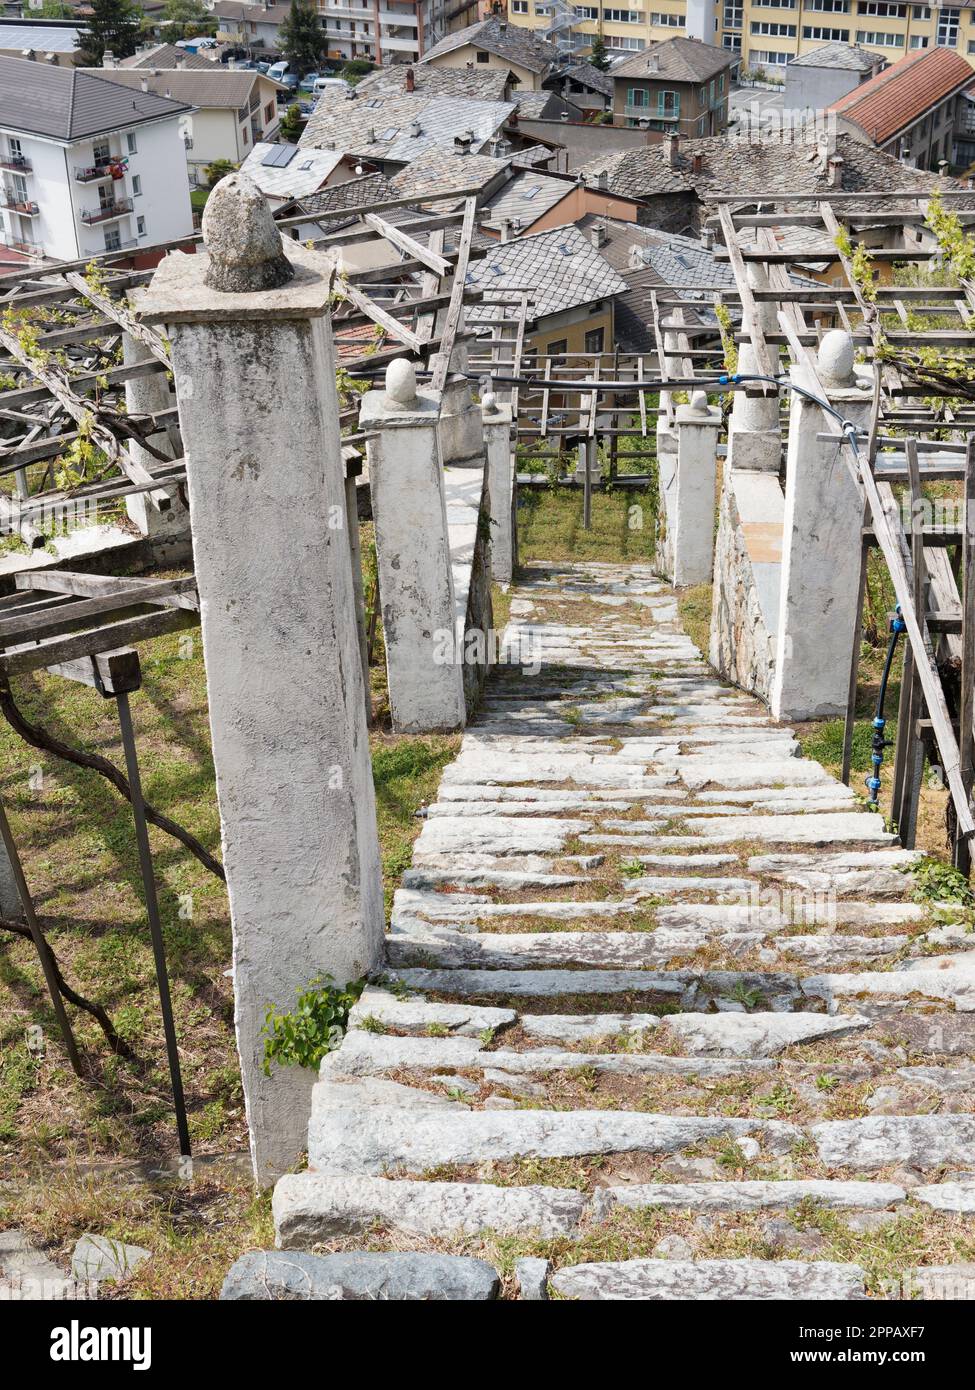 TVineyard with Stone steps and pillars in the town of Pont-Saint-Martin, Aosta Valley, NW Italy Stock Photo